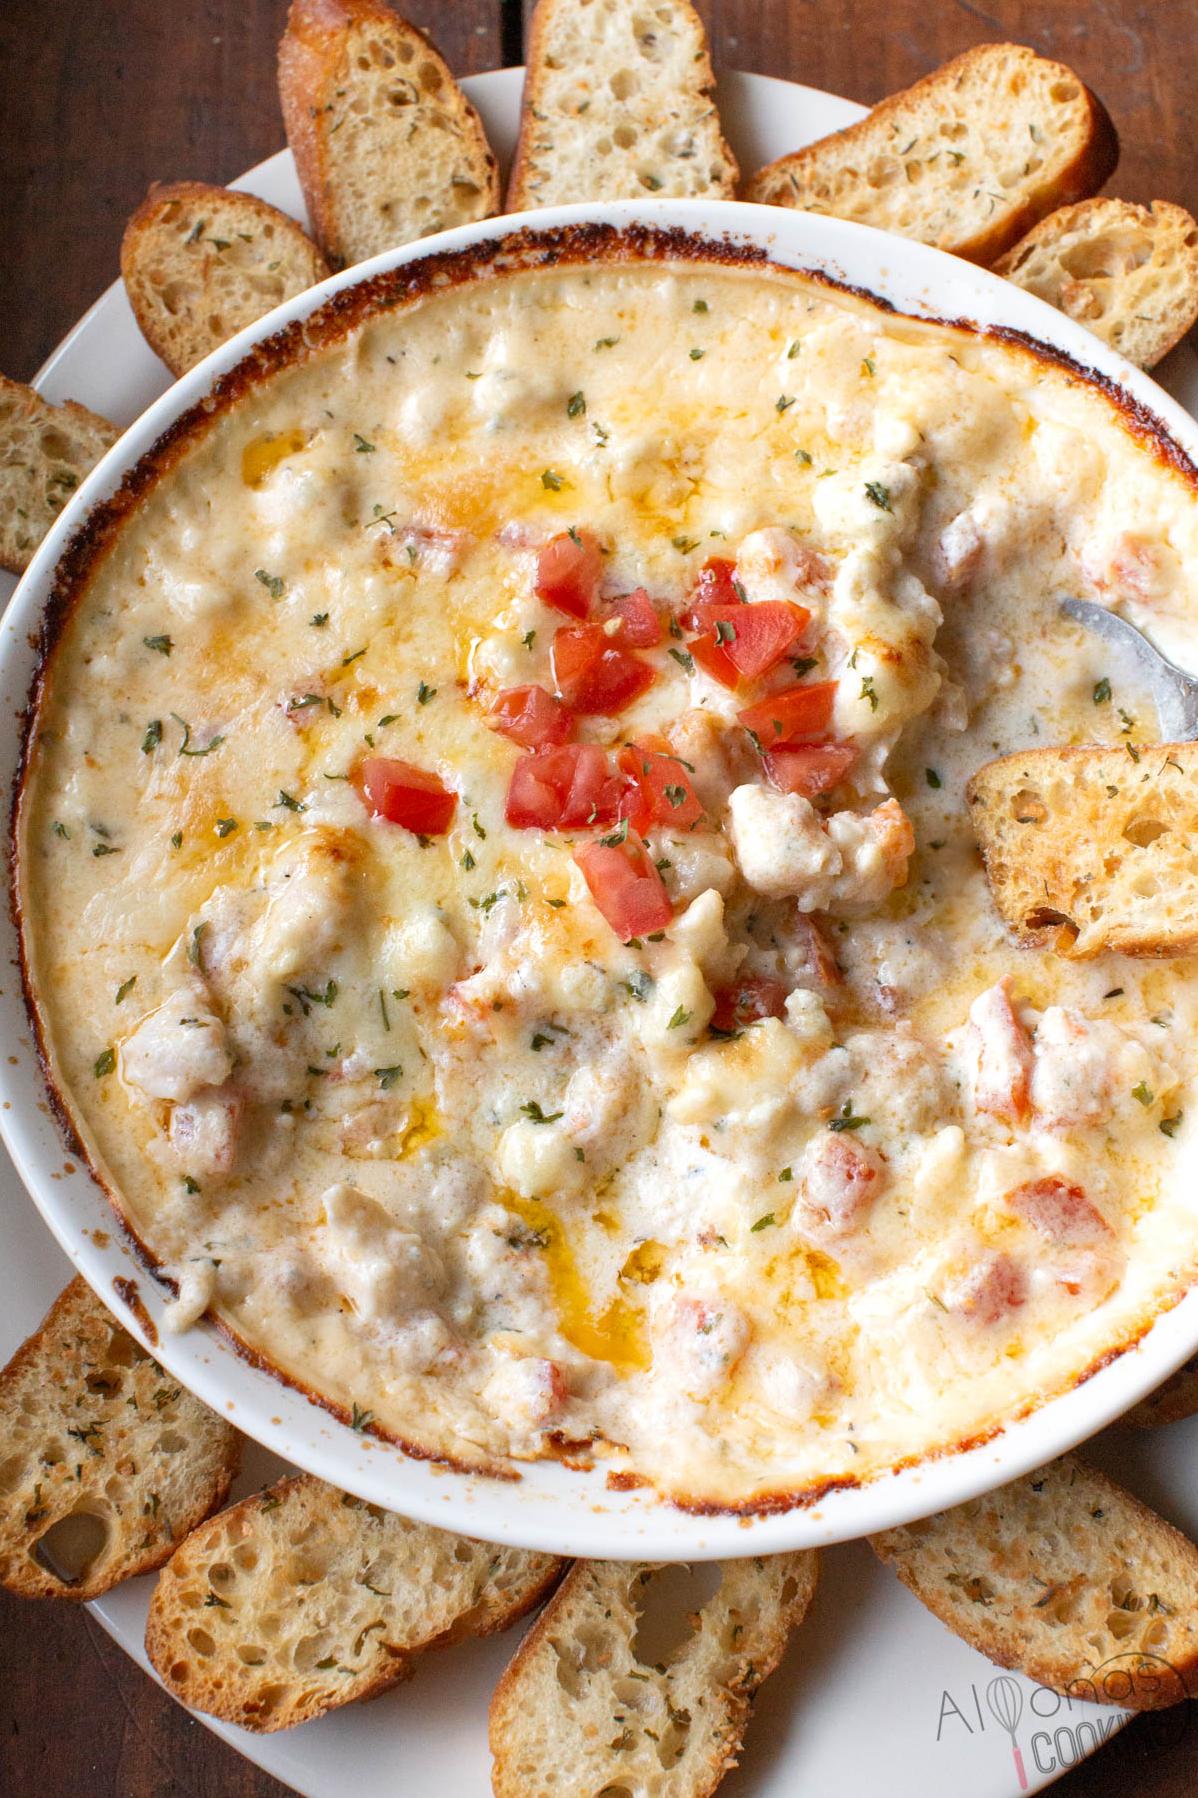  With just a few ingredients, you can make this tasty Shrimp Dip in minutes.